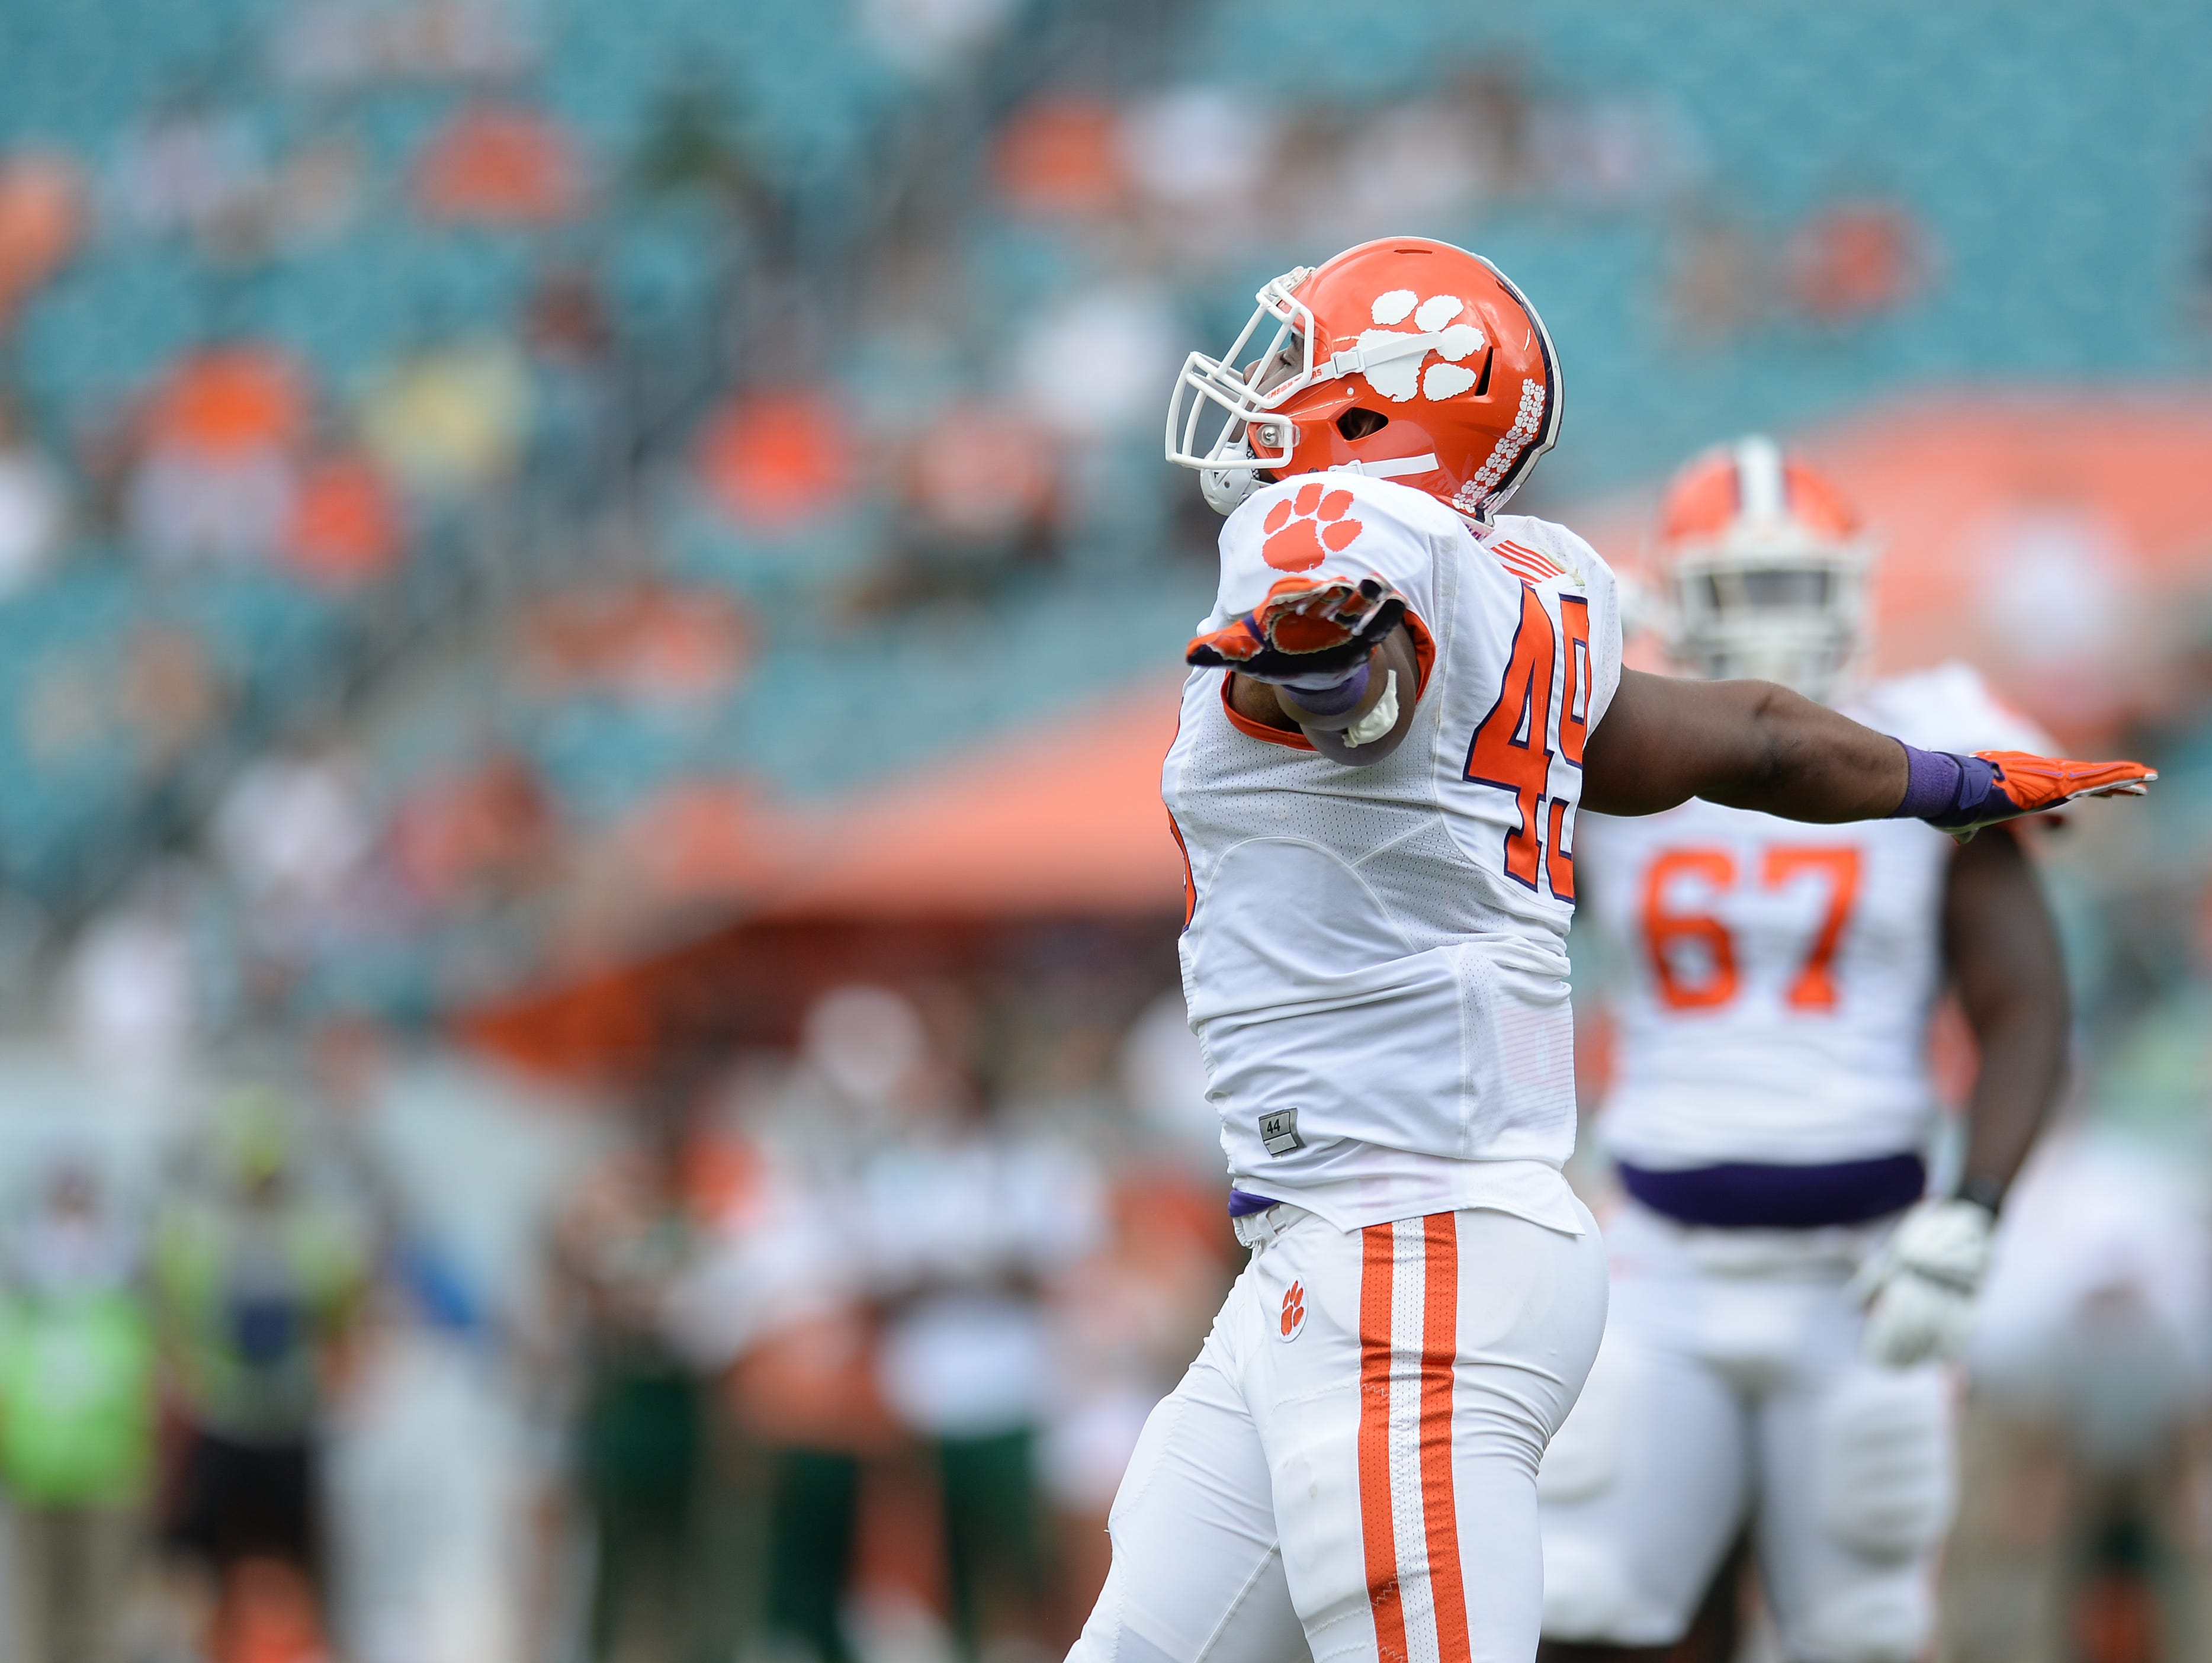 Clemson safety Beau Brown (49) reacts after sacking Miami quarterback Malik Rosier (12) during the 3rd quarter Saturday, Oct. 24, 2015, in Miami Gardens, Fla.